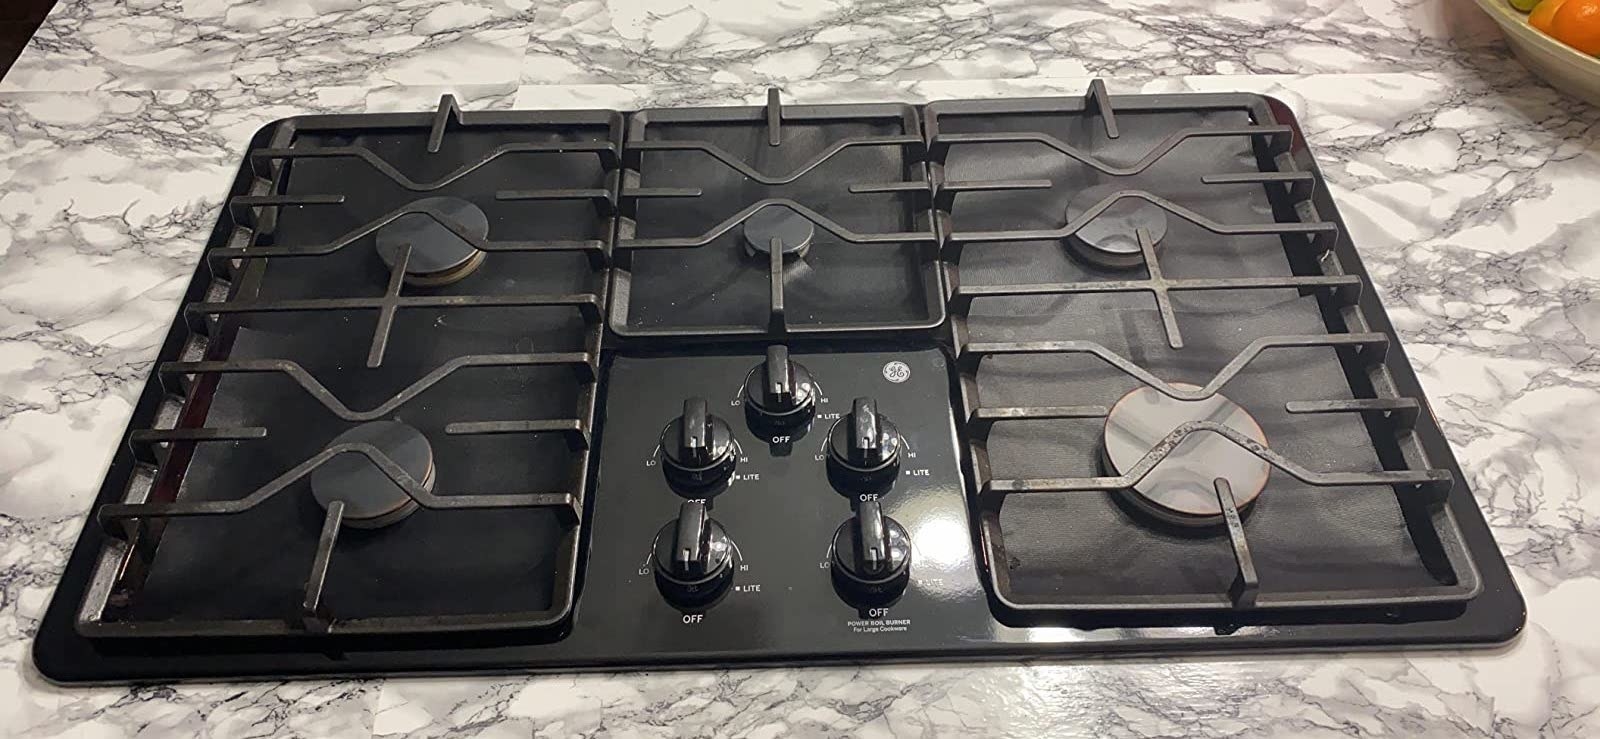 reviewer&#x27;s stove with the covers around the burners